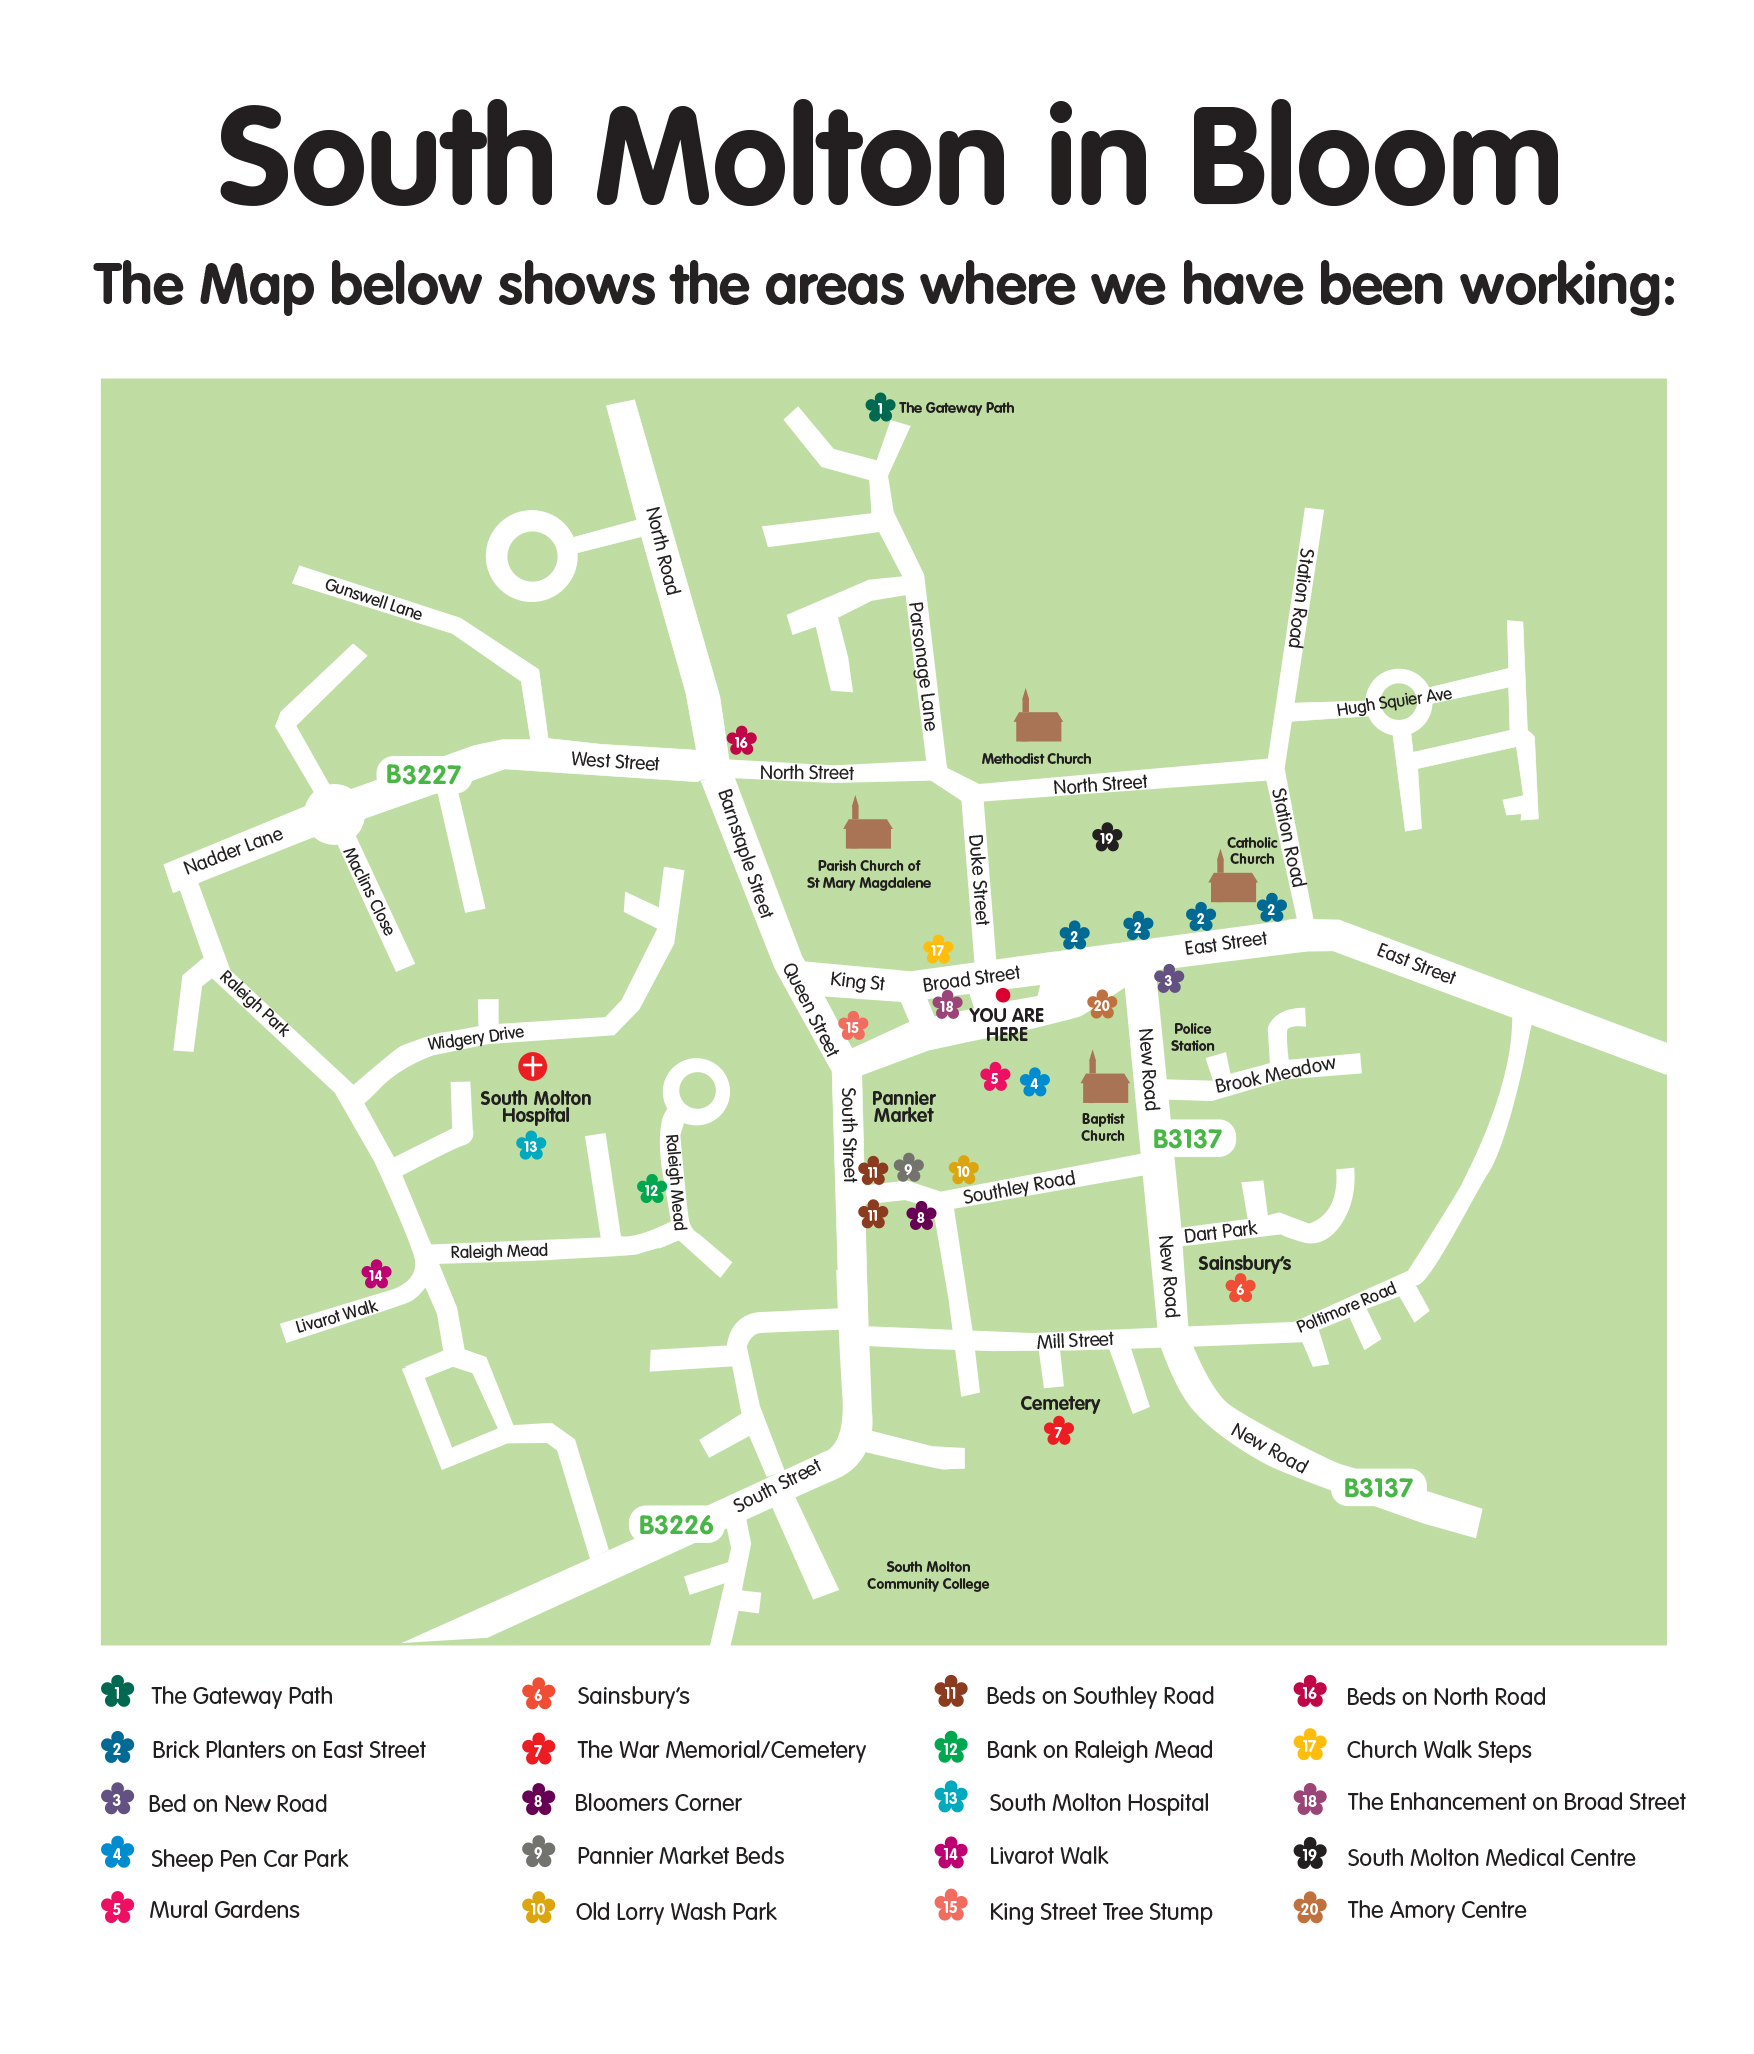 About South Molton in Bloom Map